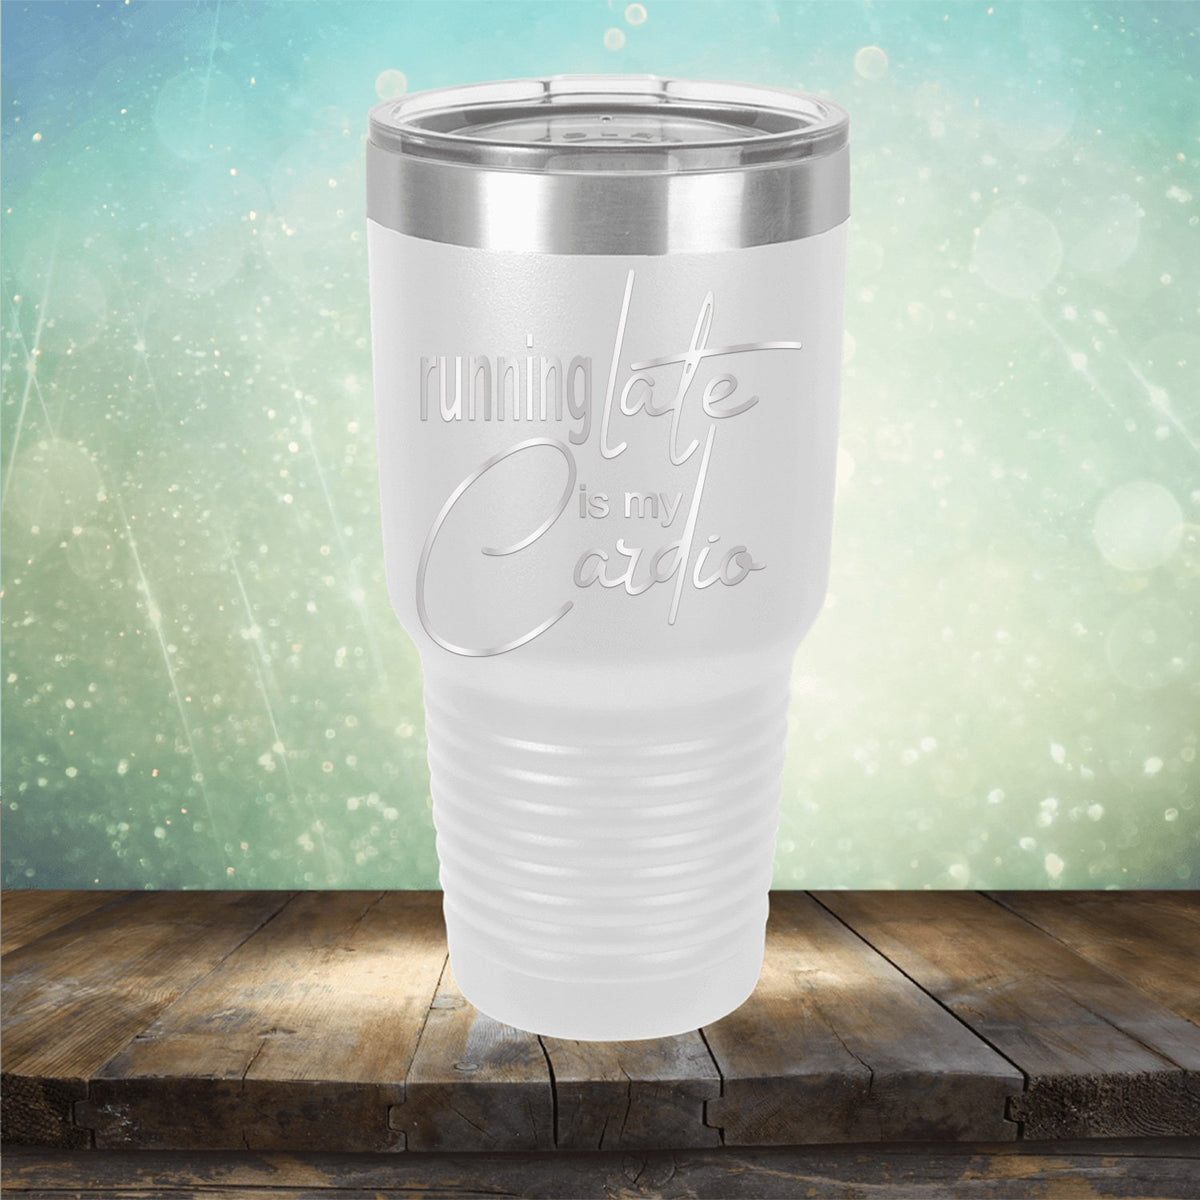 Running Late is My Cardio - Laser Etched Tumbler Mug